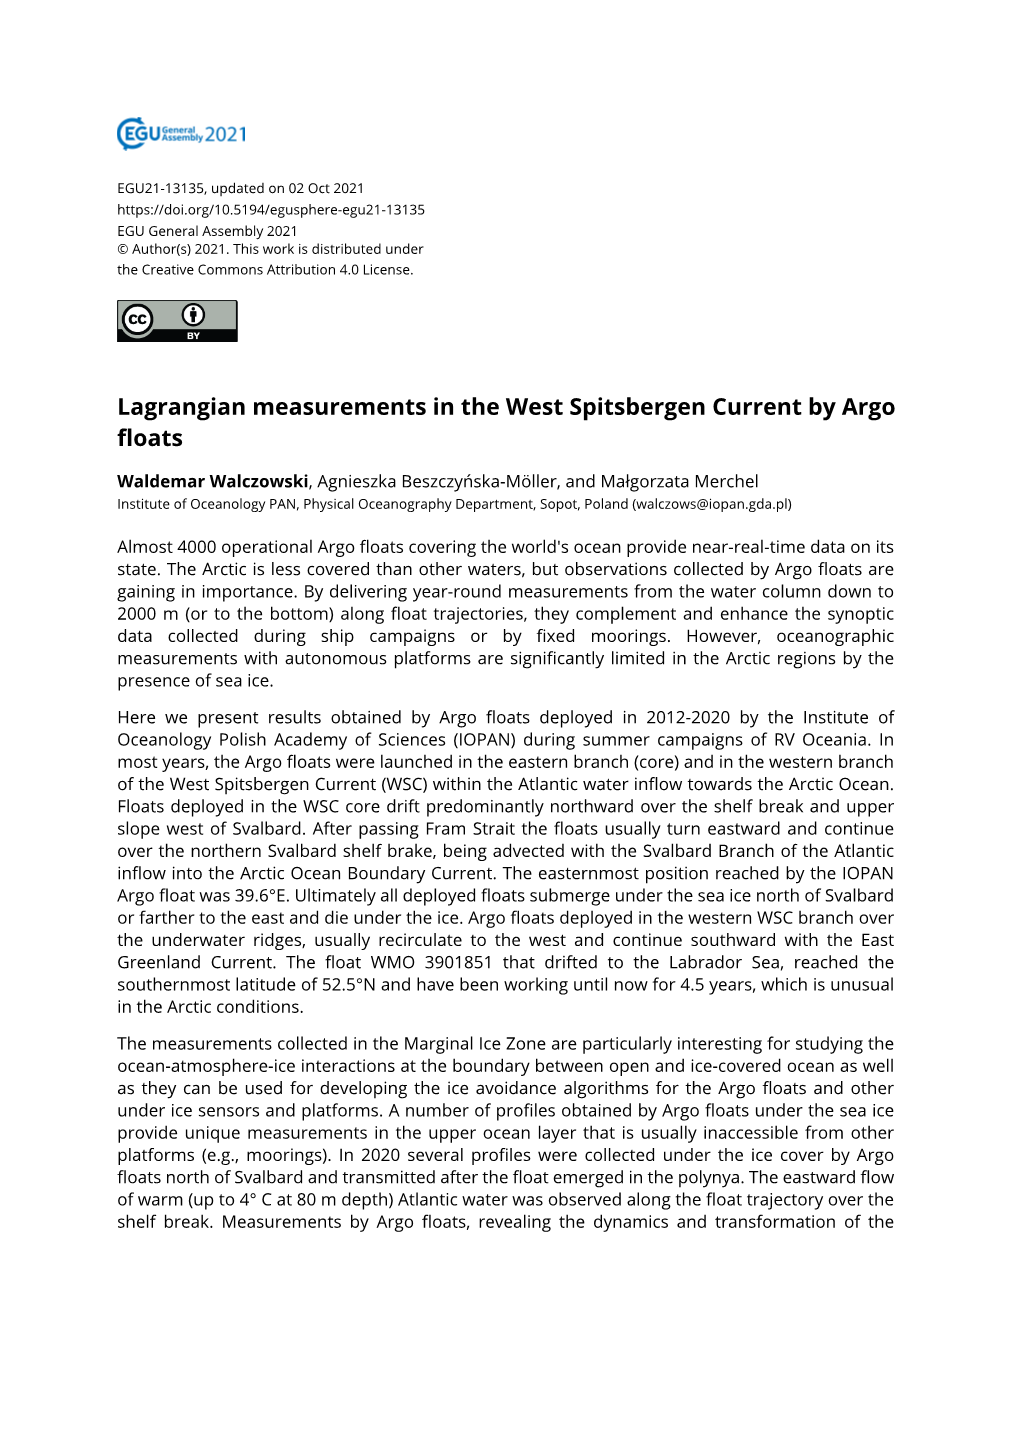 Lagrangian Measurements in the West Spitsbergen Current by Argo Floats